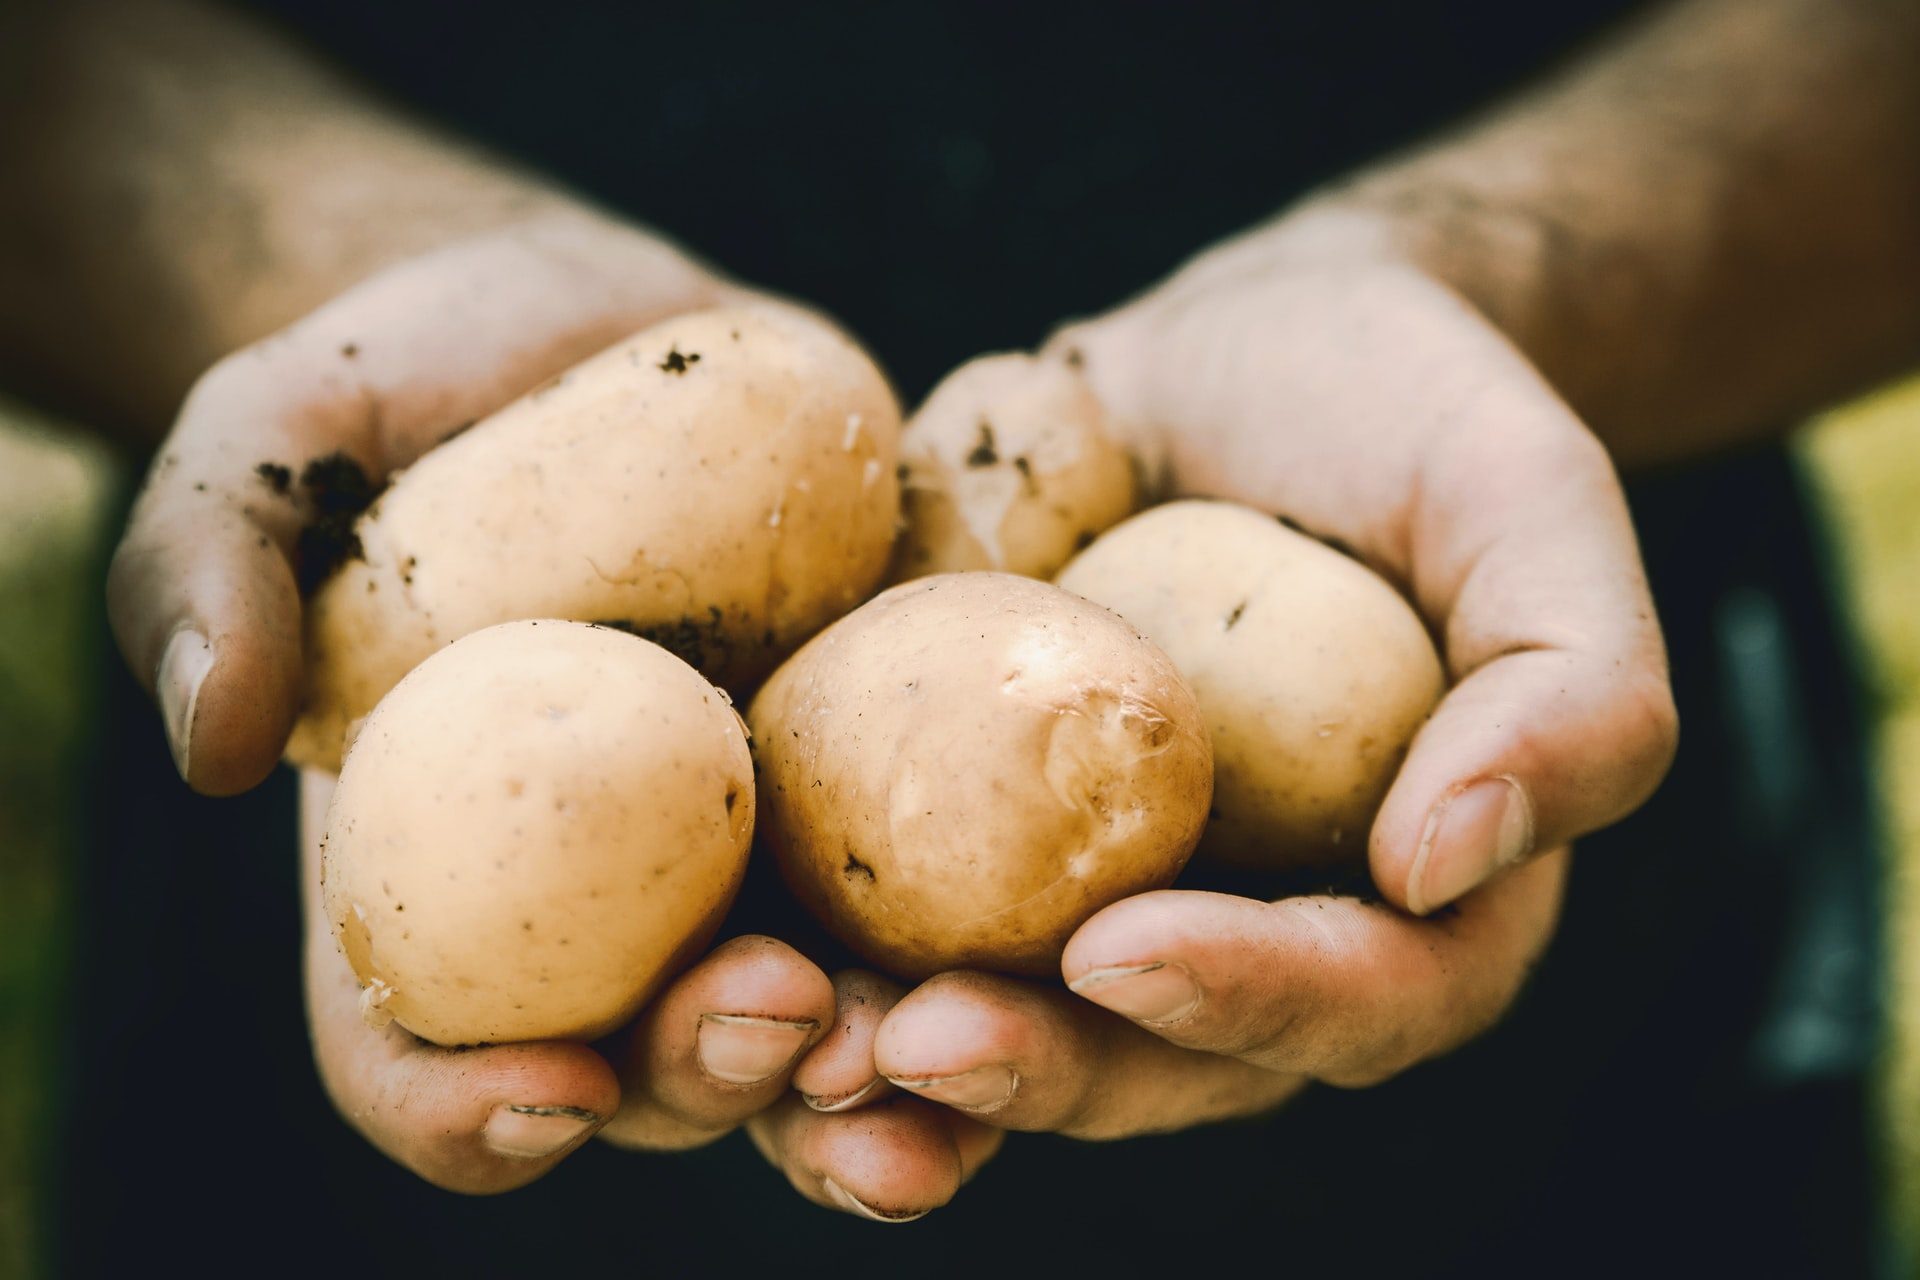 New Study Shows That People With Type 2 Diabetes Can Eat Potatoes